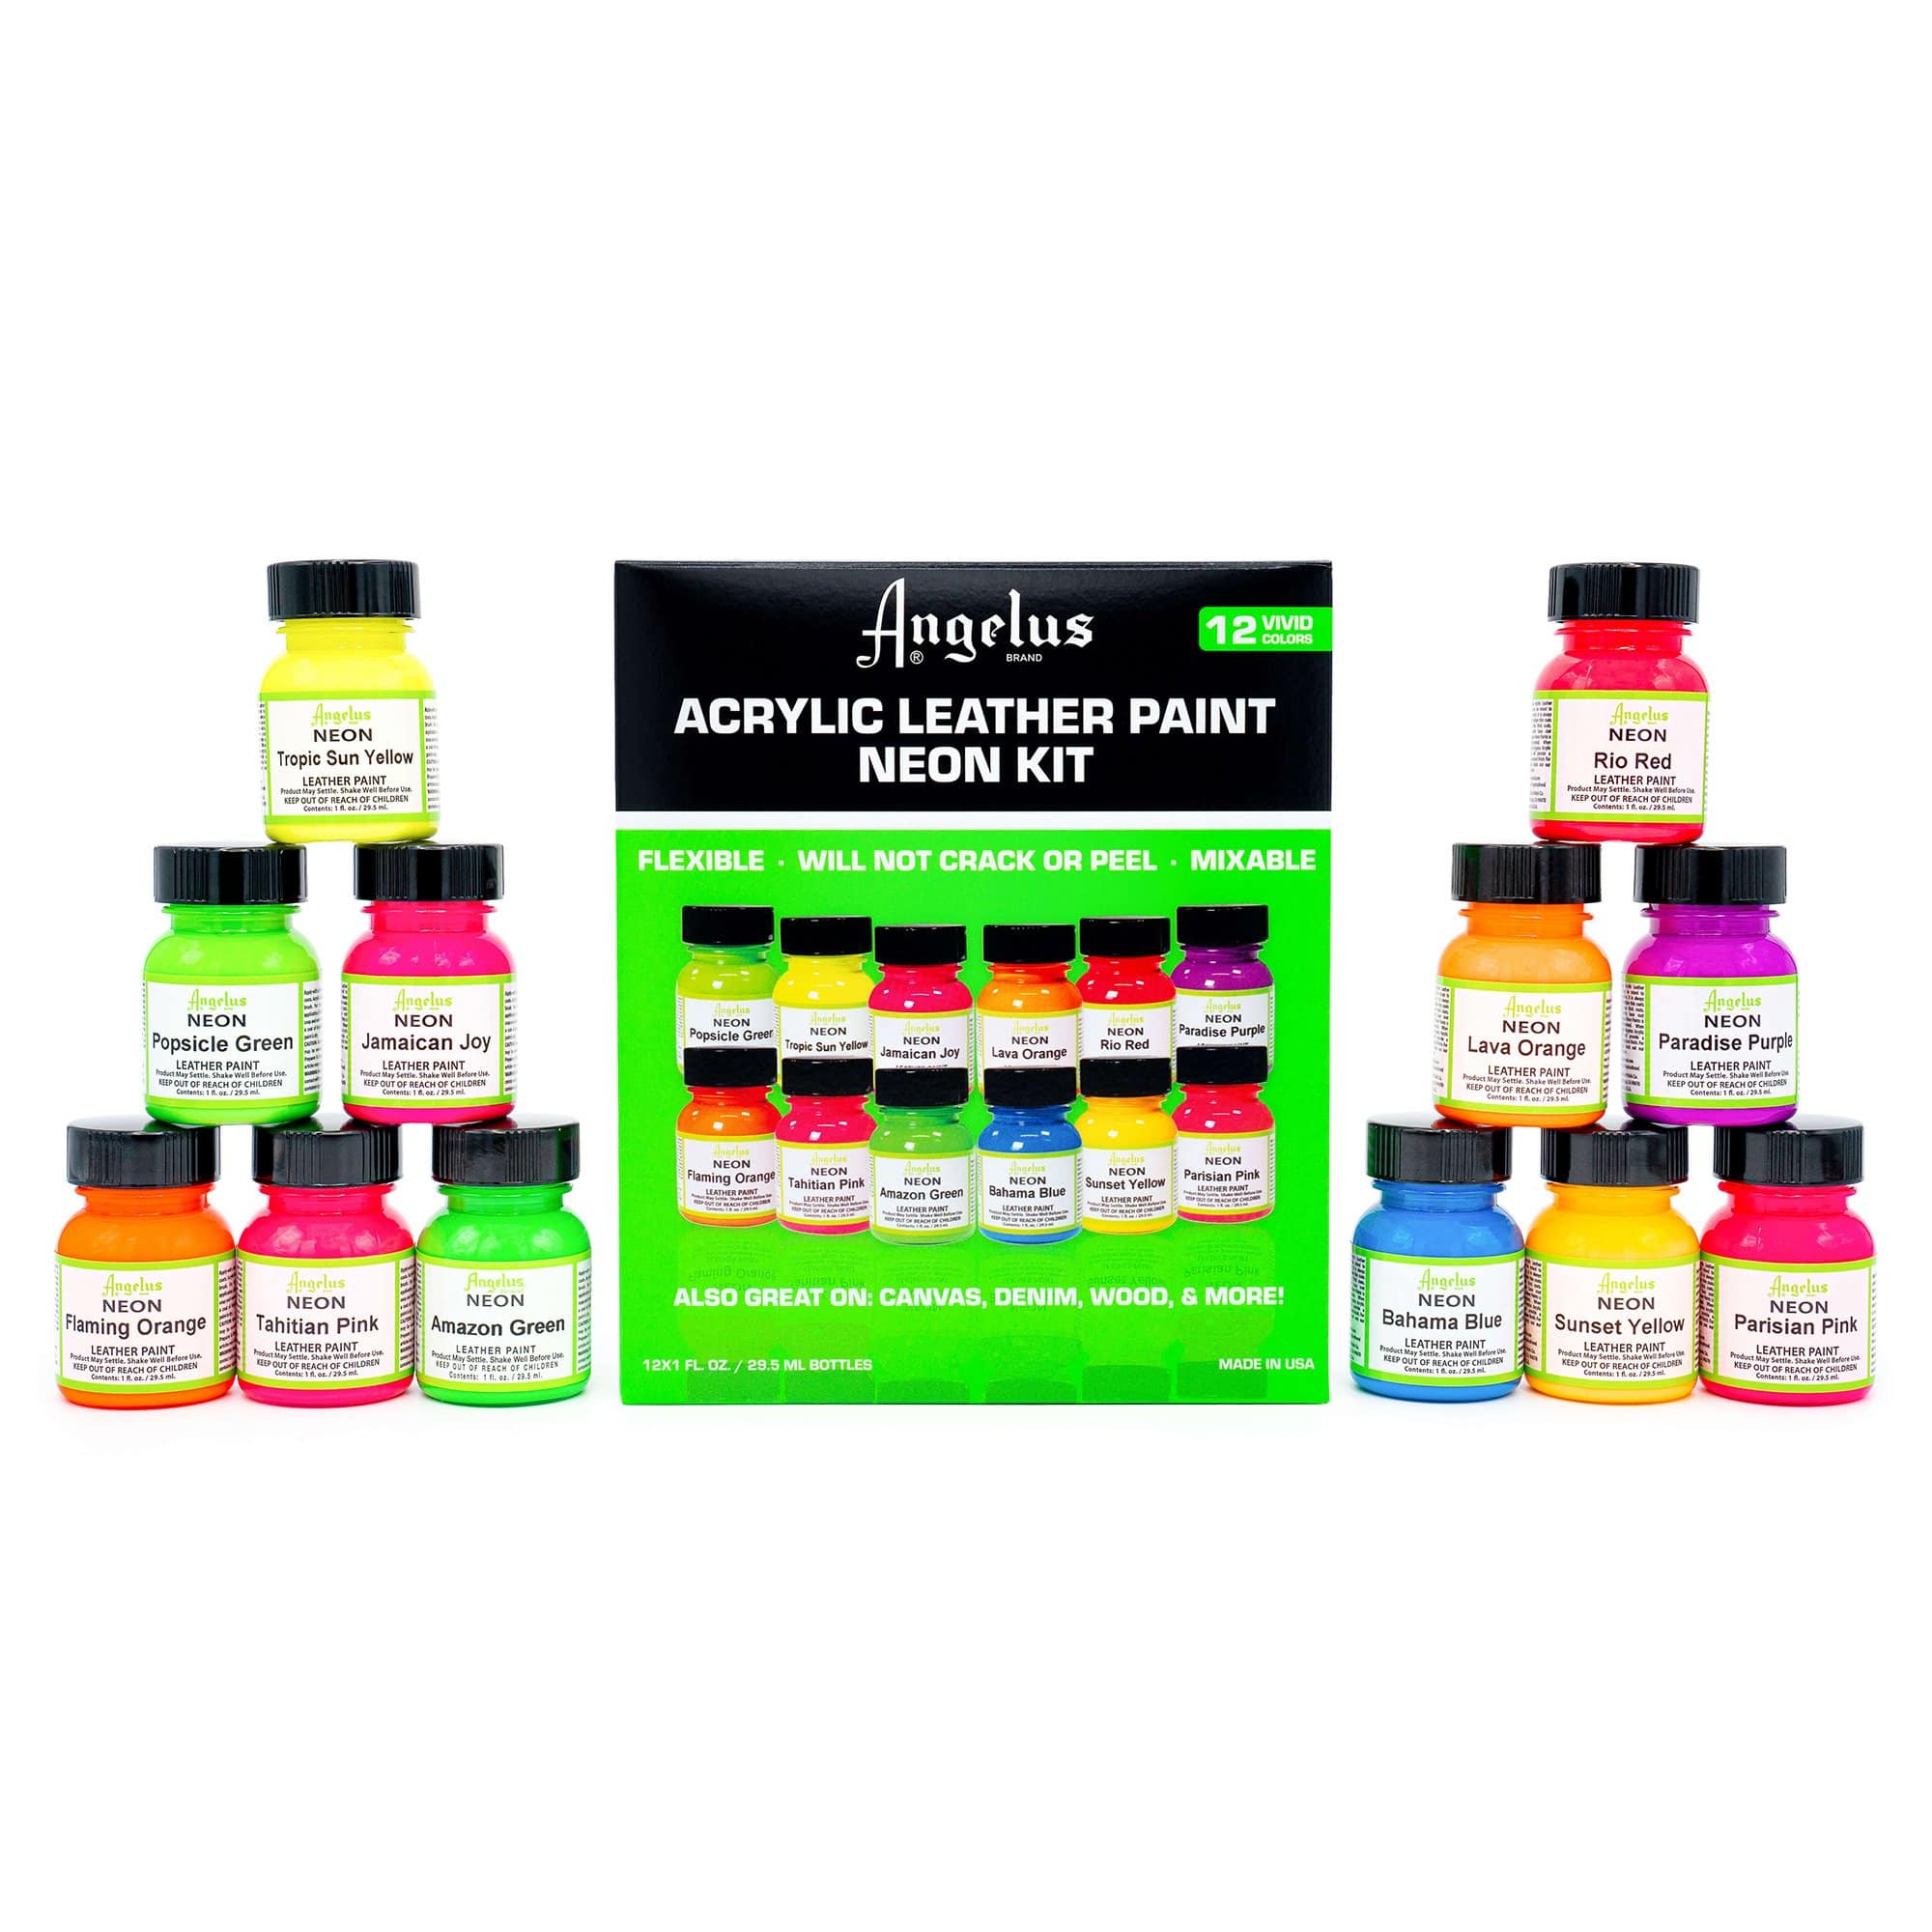 Acrylic Leather Paint for Shoes - 18 Color Leather Paint Kit With 5 Paint  Brushes (Deglazer & finisher not Included) - Great Repair Finisher for